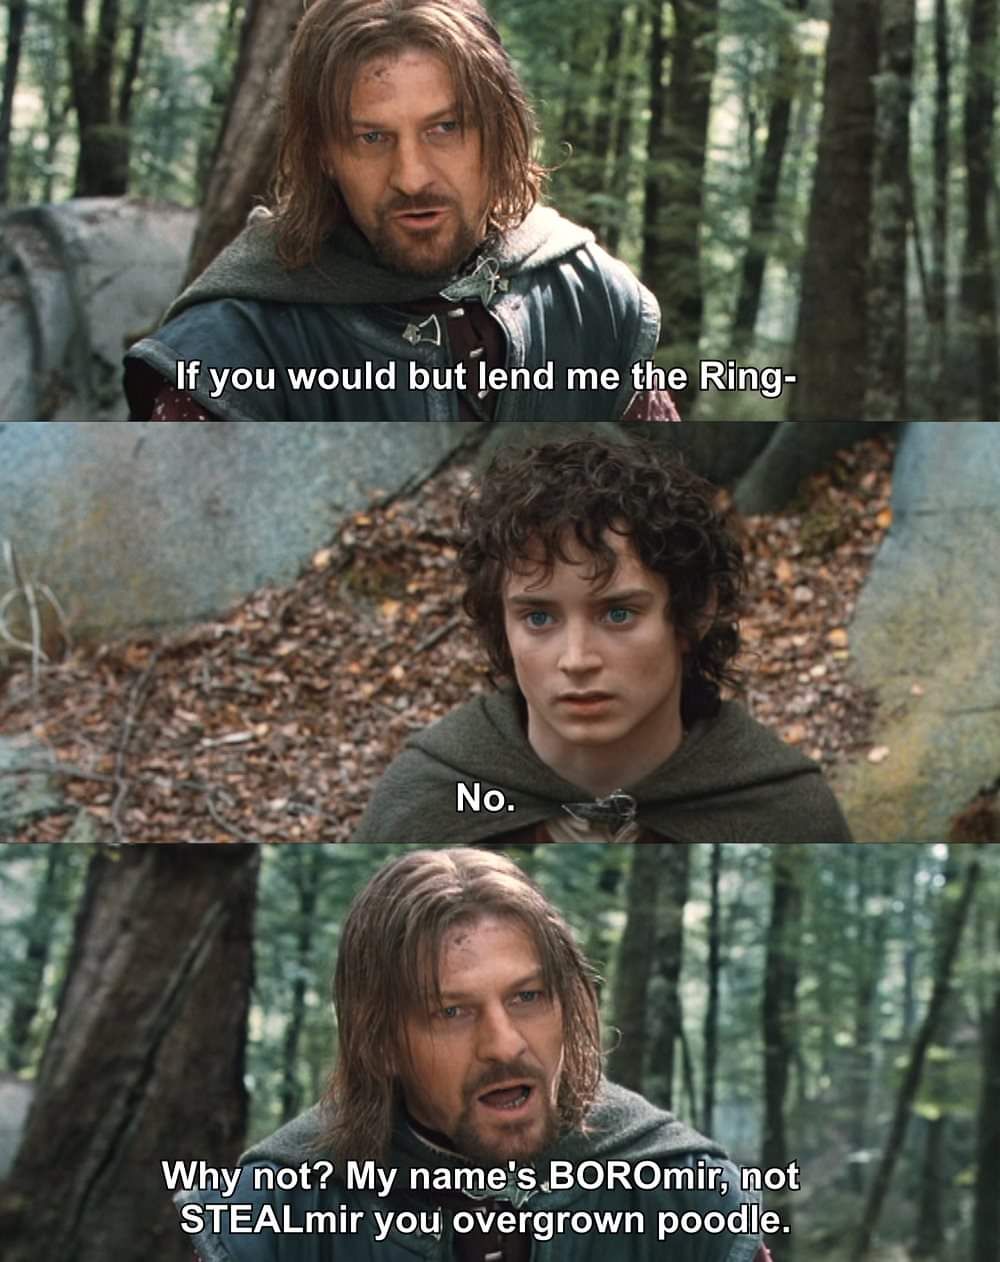 Boromir and Frodo talking, with Boromir pointing out his name isn’t Stealomir